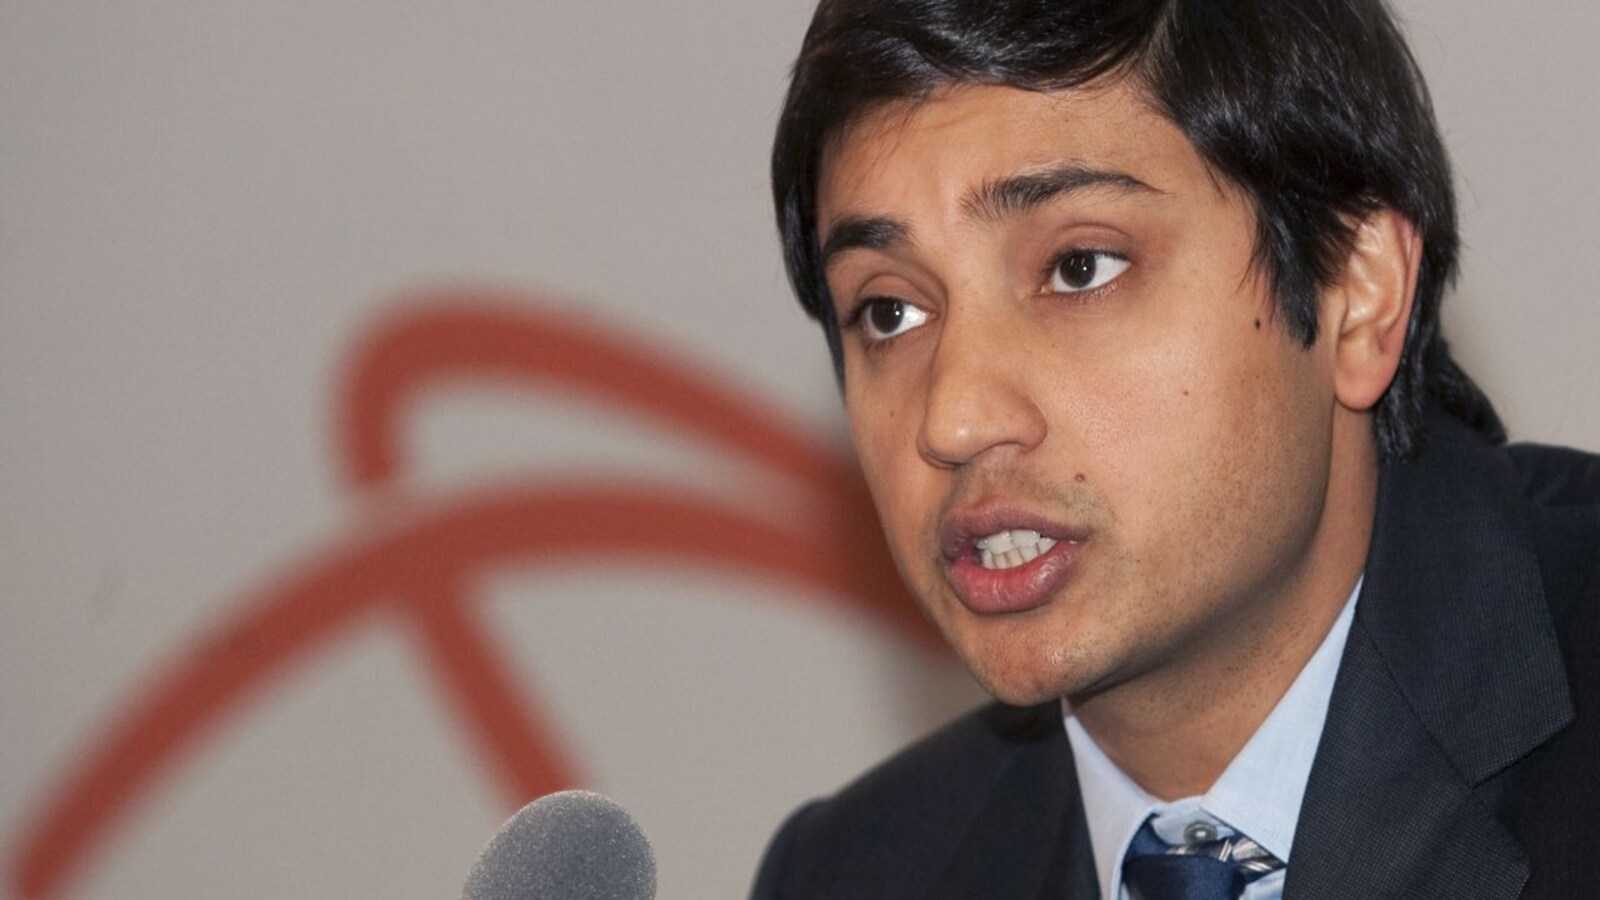 Read all Latest Updates on and about Aditya Mittal